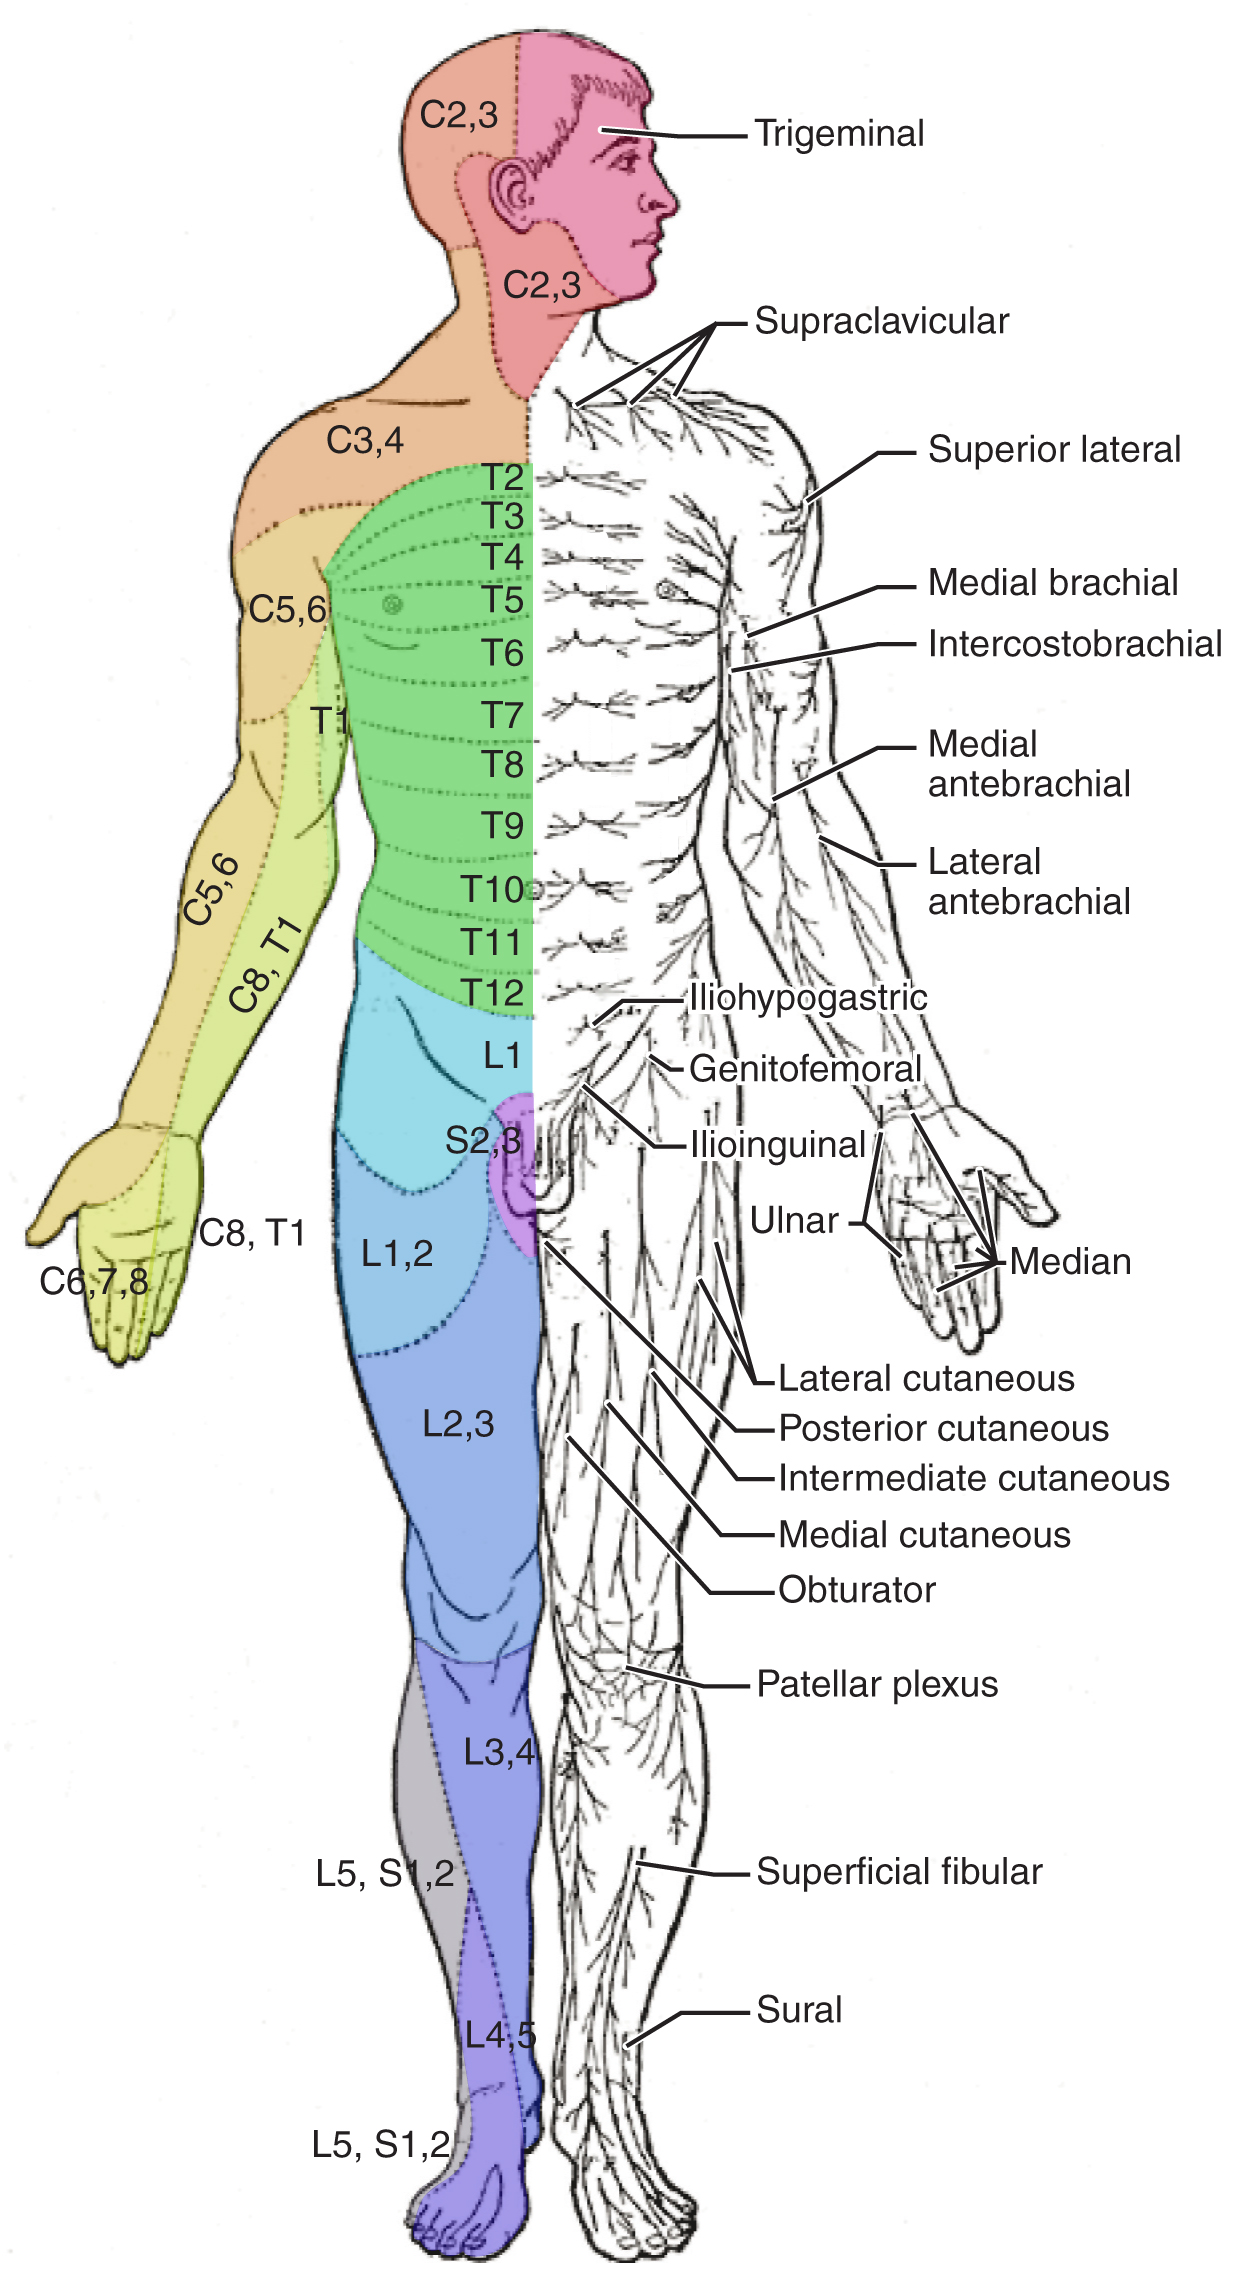 Both panels in this image show the front view of a human body. The left image shows different regions in different colors. In both images, different parts are labeled.